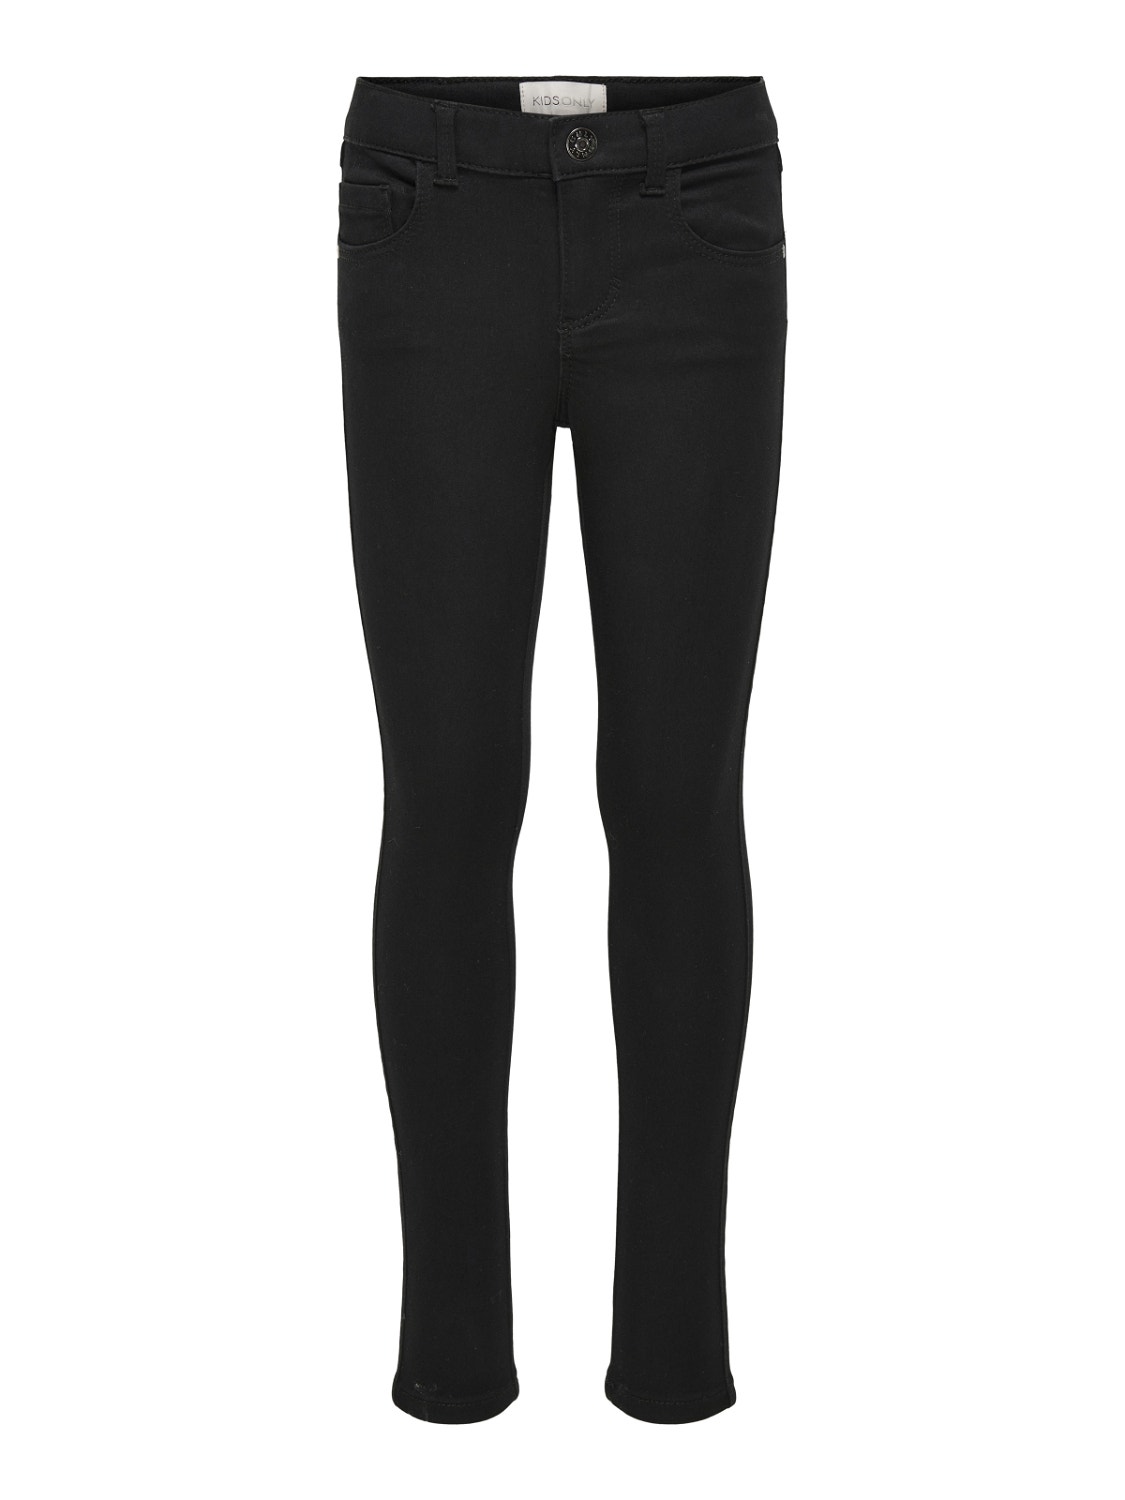 ONLY Jeans Skinny Fit -Black - 15234567